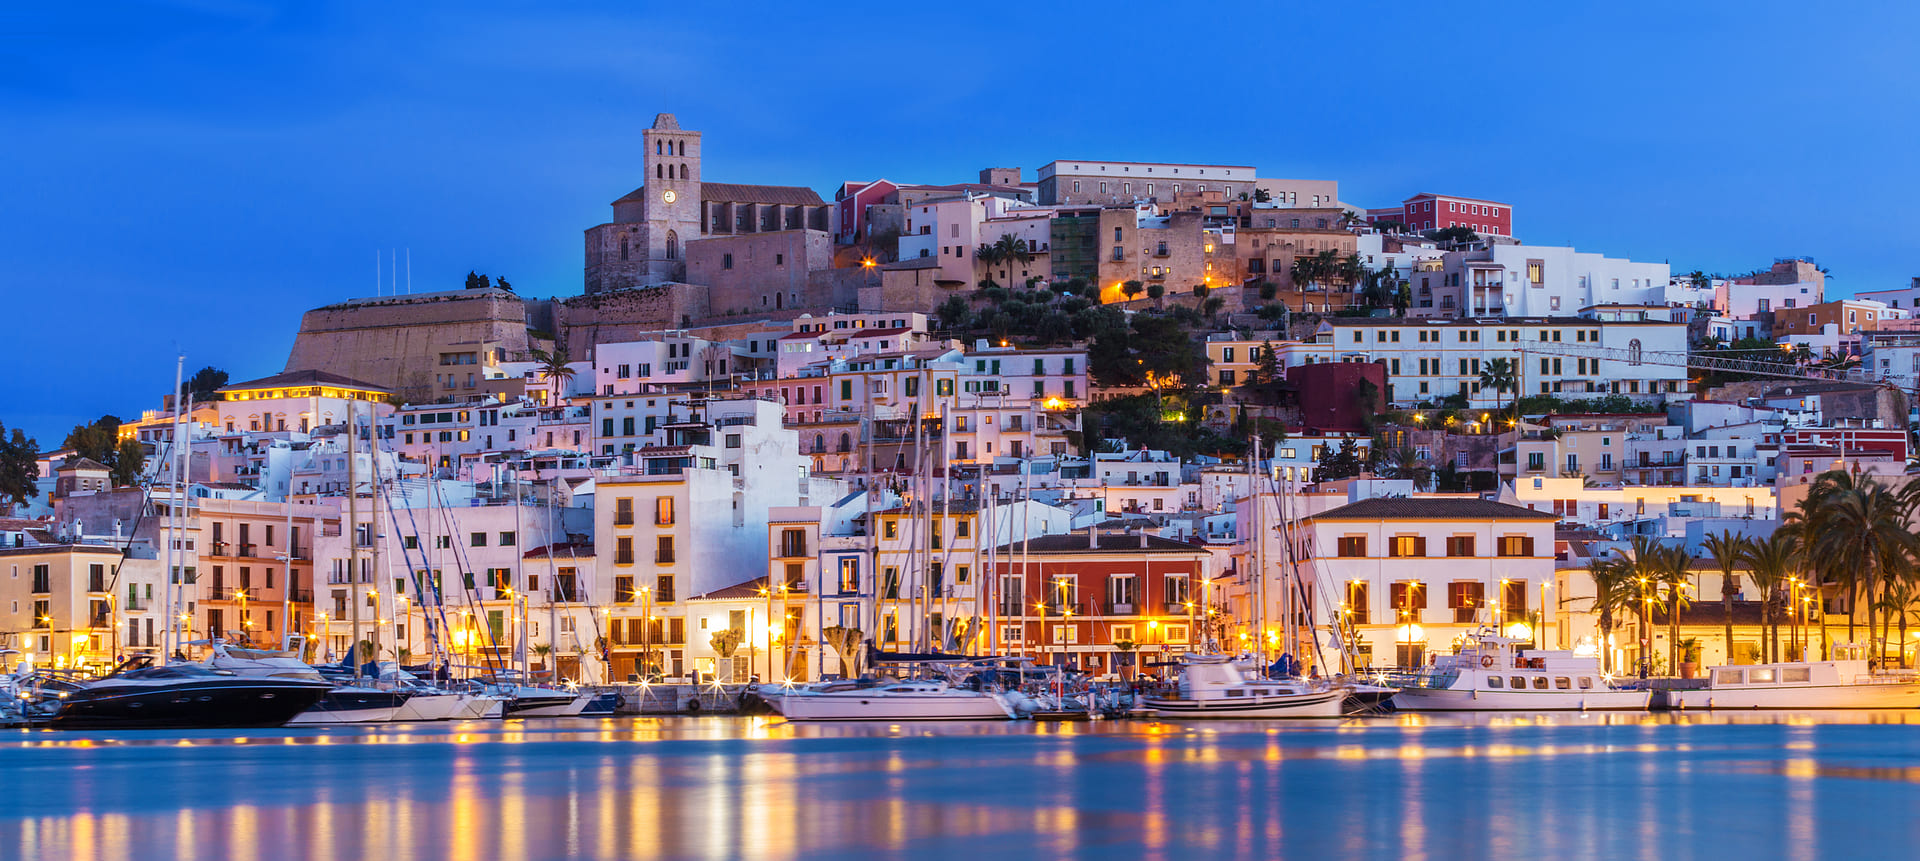 Ibiza Dalt Vila downtown at night with light reflections in the water, Ibiza, Spain.
